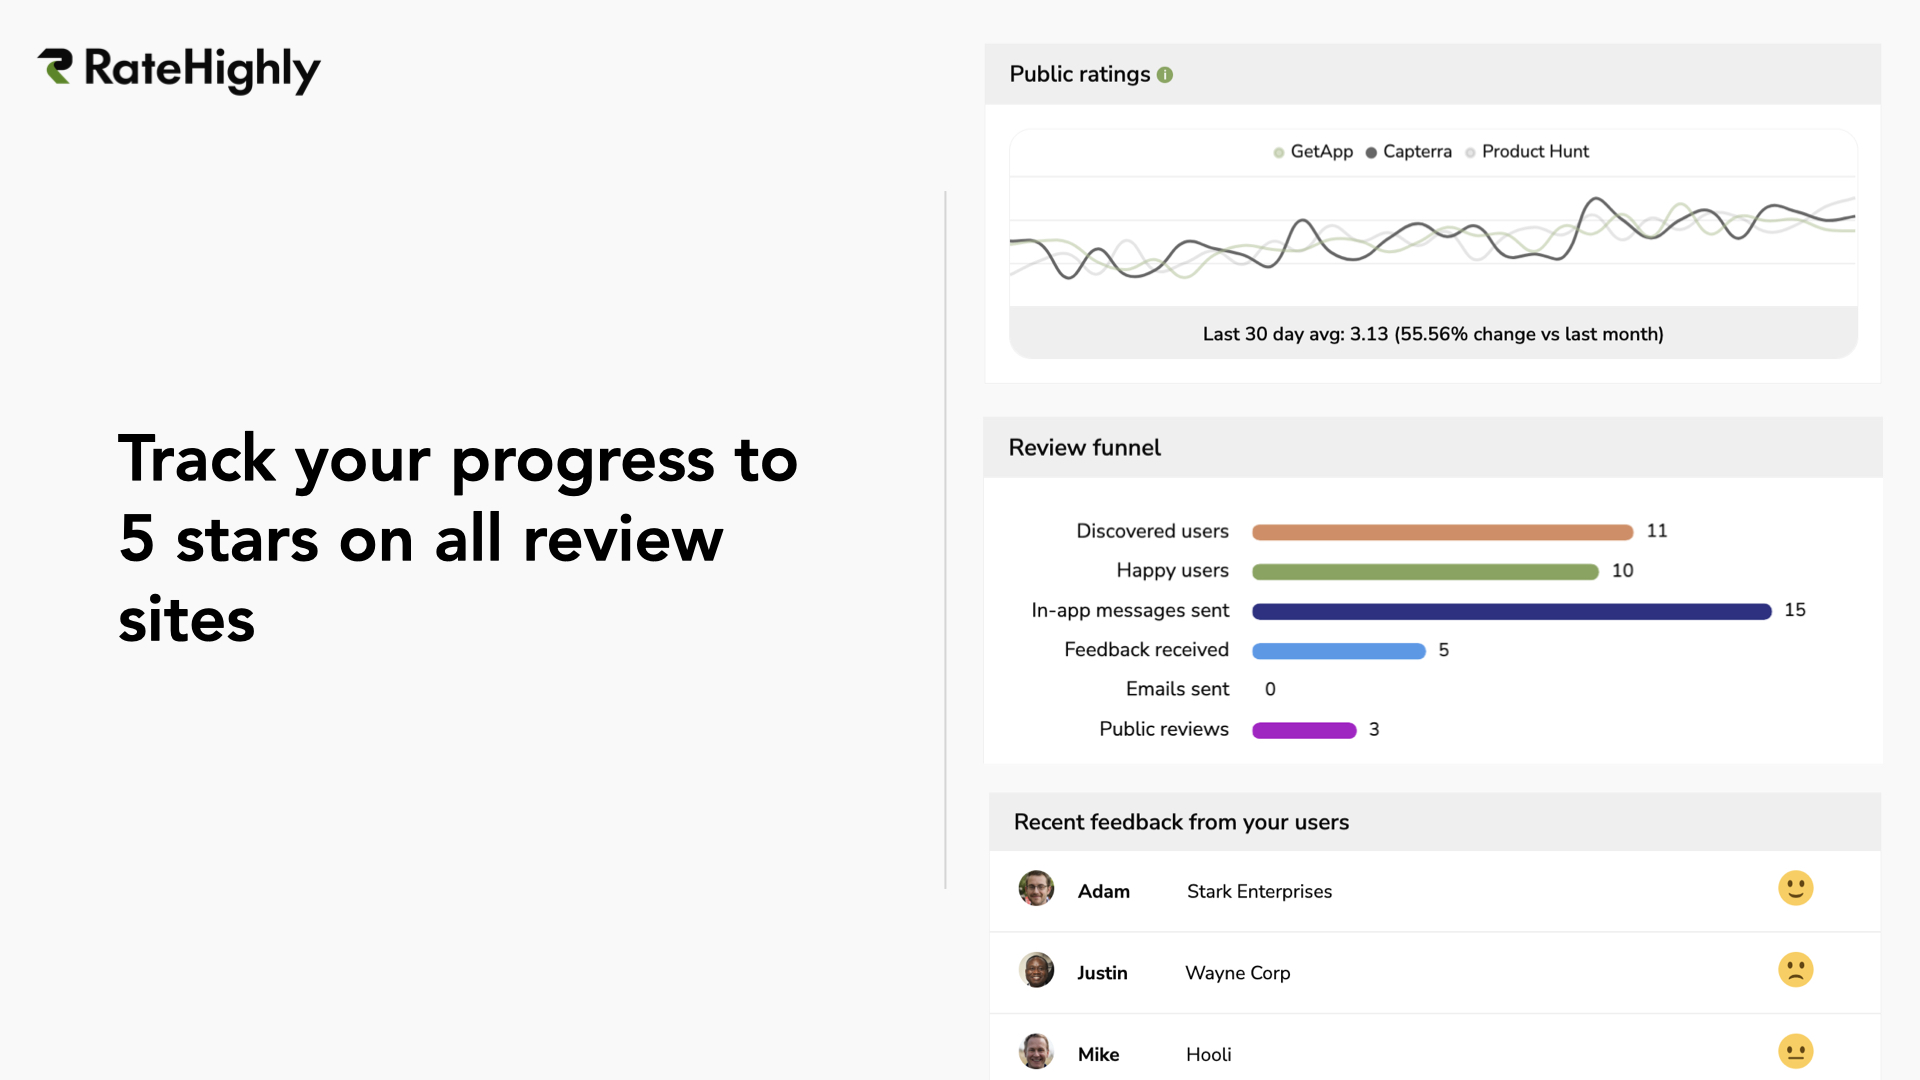 Use the RateHighly dashboard to track your progress to 5 star reviews on all review sites